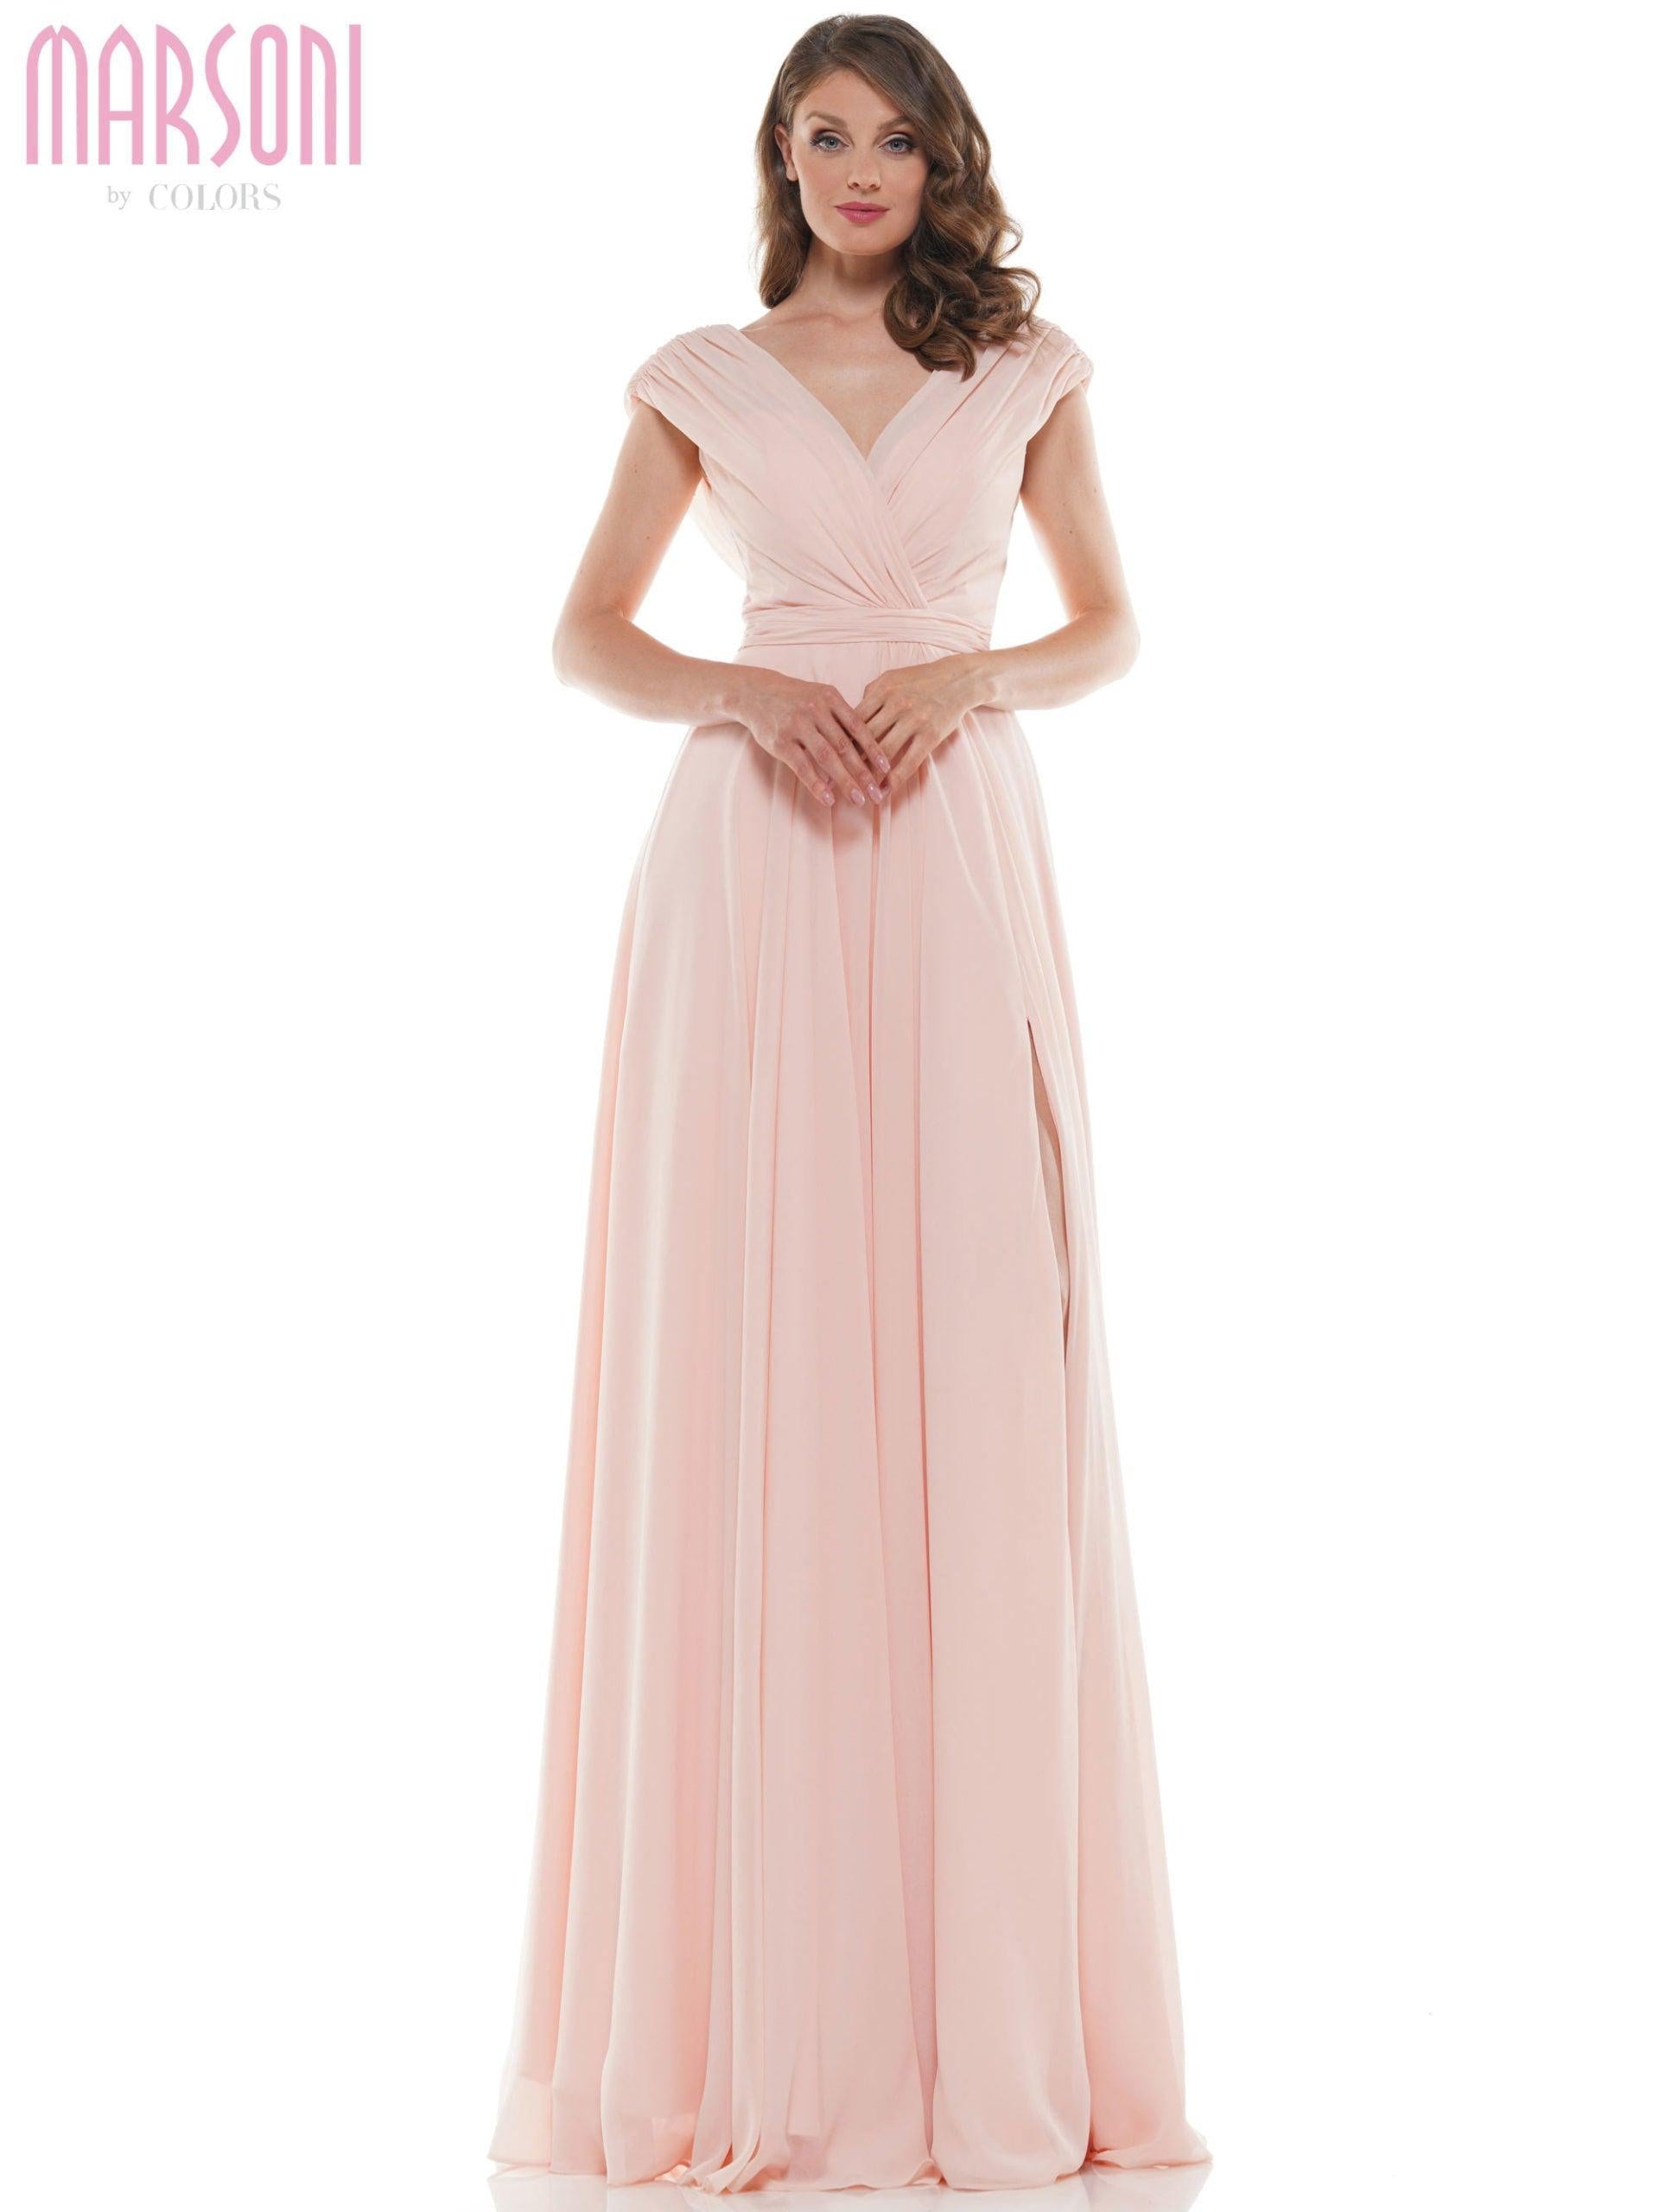 Marsoni Formal Mother of the Bride Long Dress 251 - The Dress Outlet